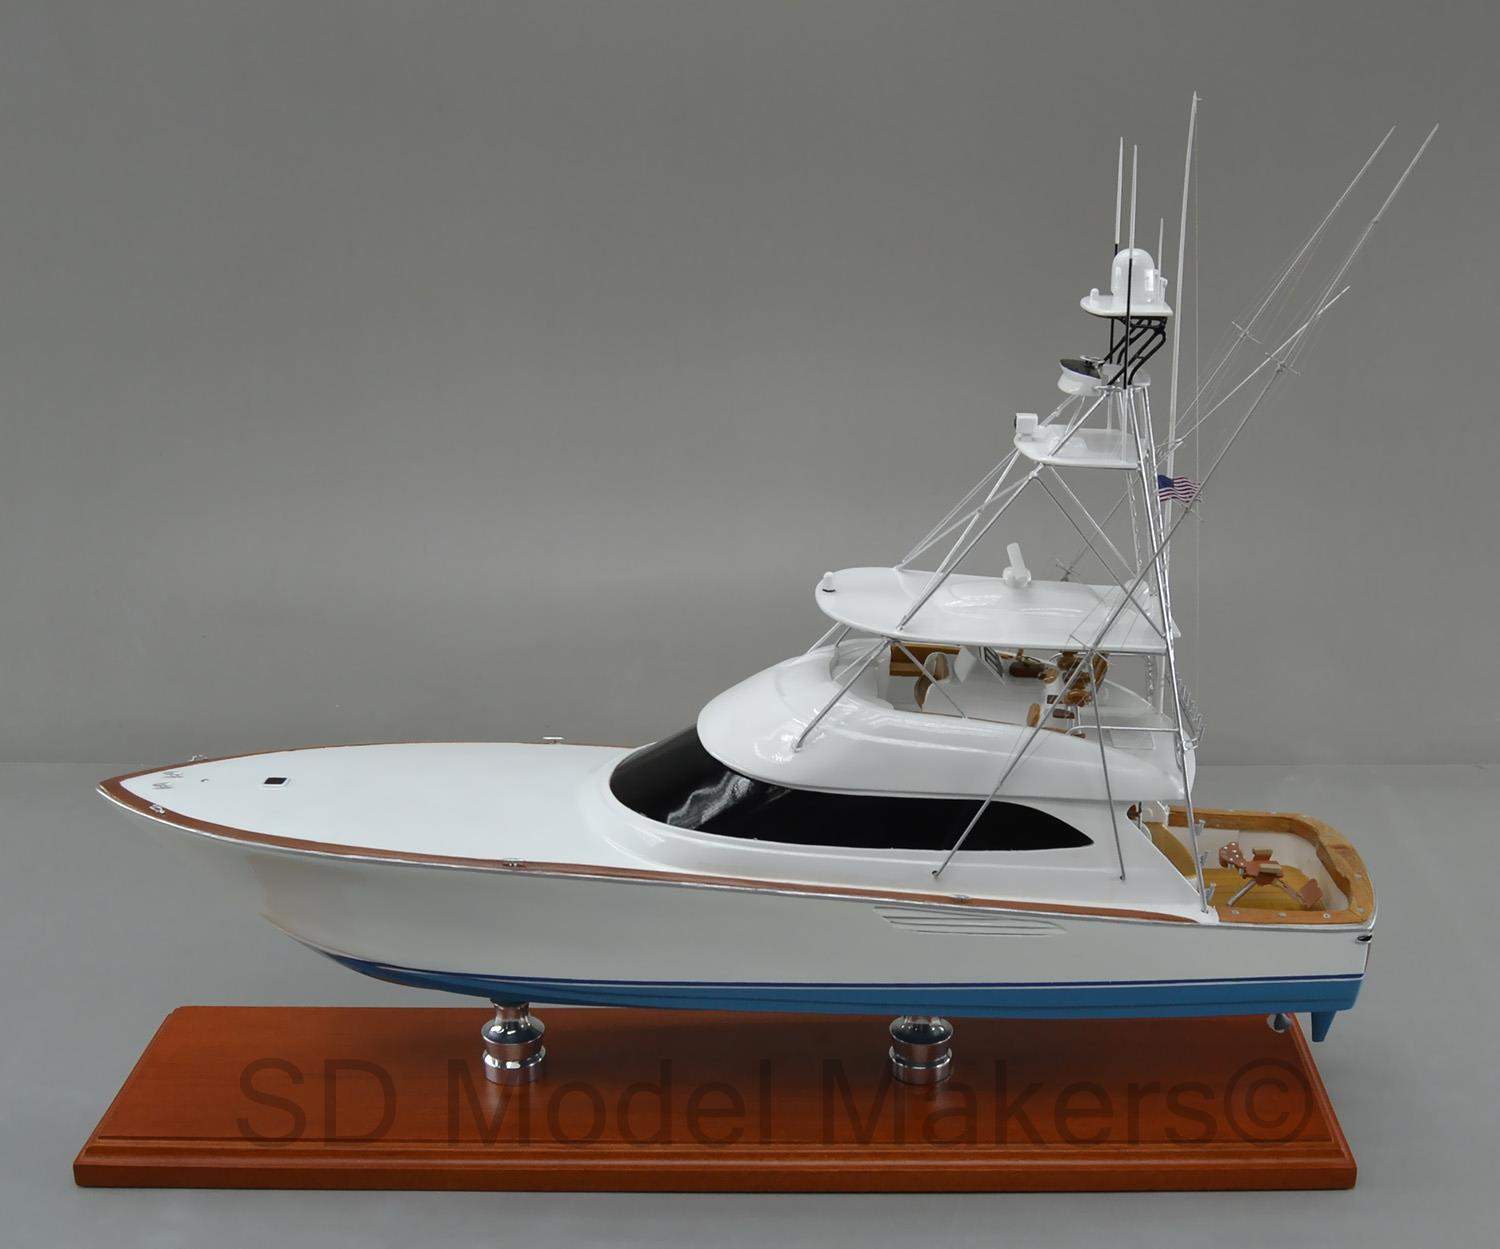 SD Model Makers: Fish On!!! 24” replica model of a Viking 70 Sport Fishing  Boat